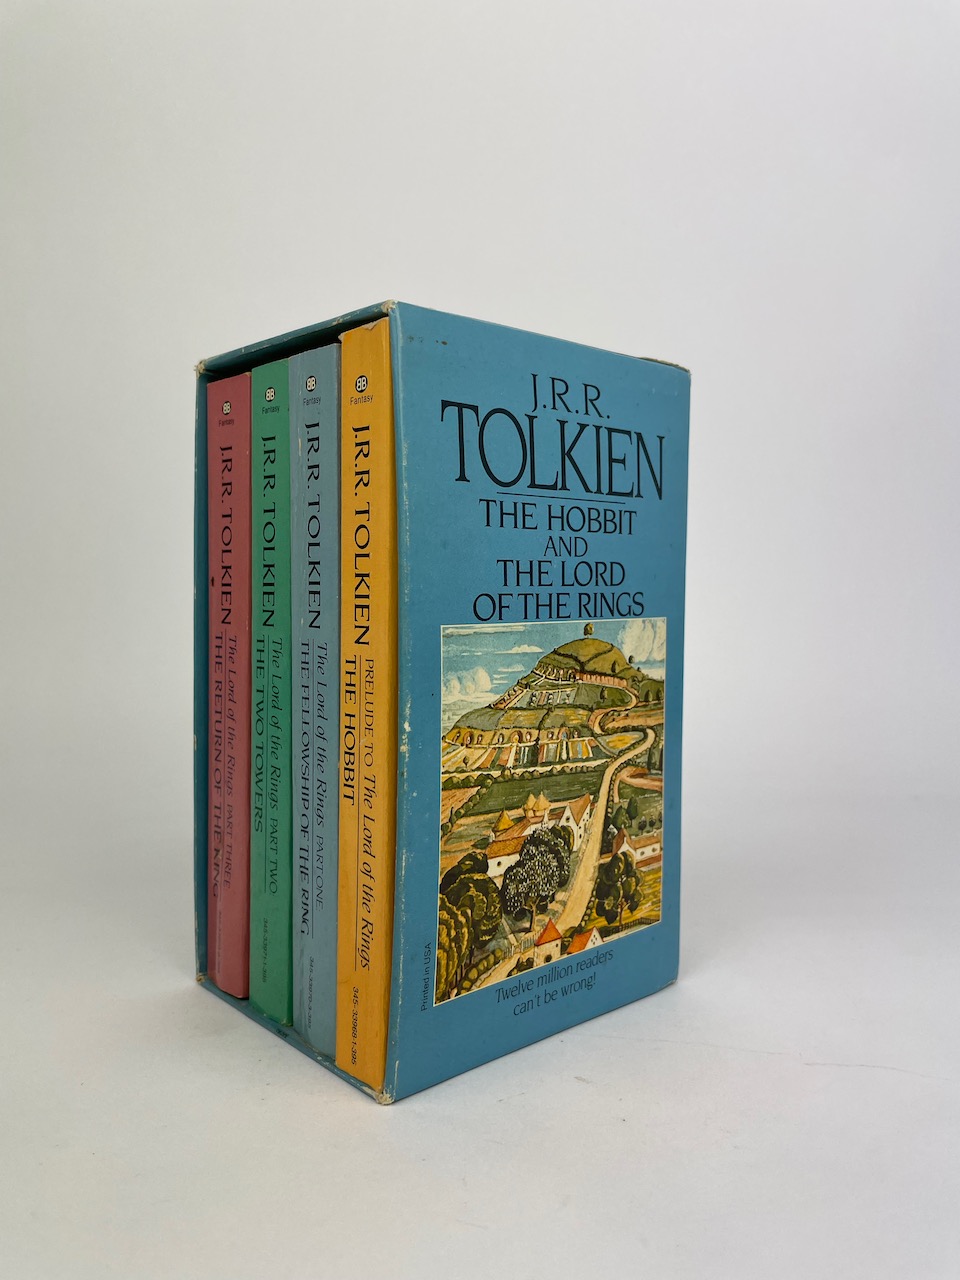 The Hobbit and The Lord of the Rings, Four Paperback Book Boxset from 1986, Blue Slipcase art by J.R.R. Tolkien